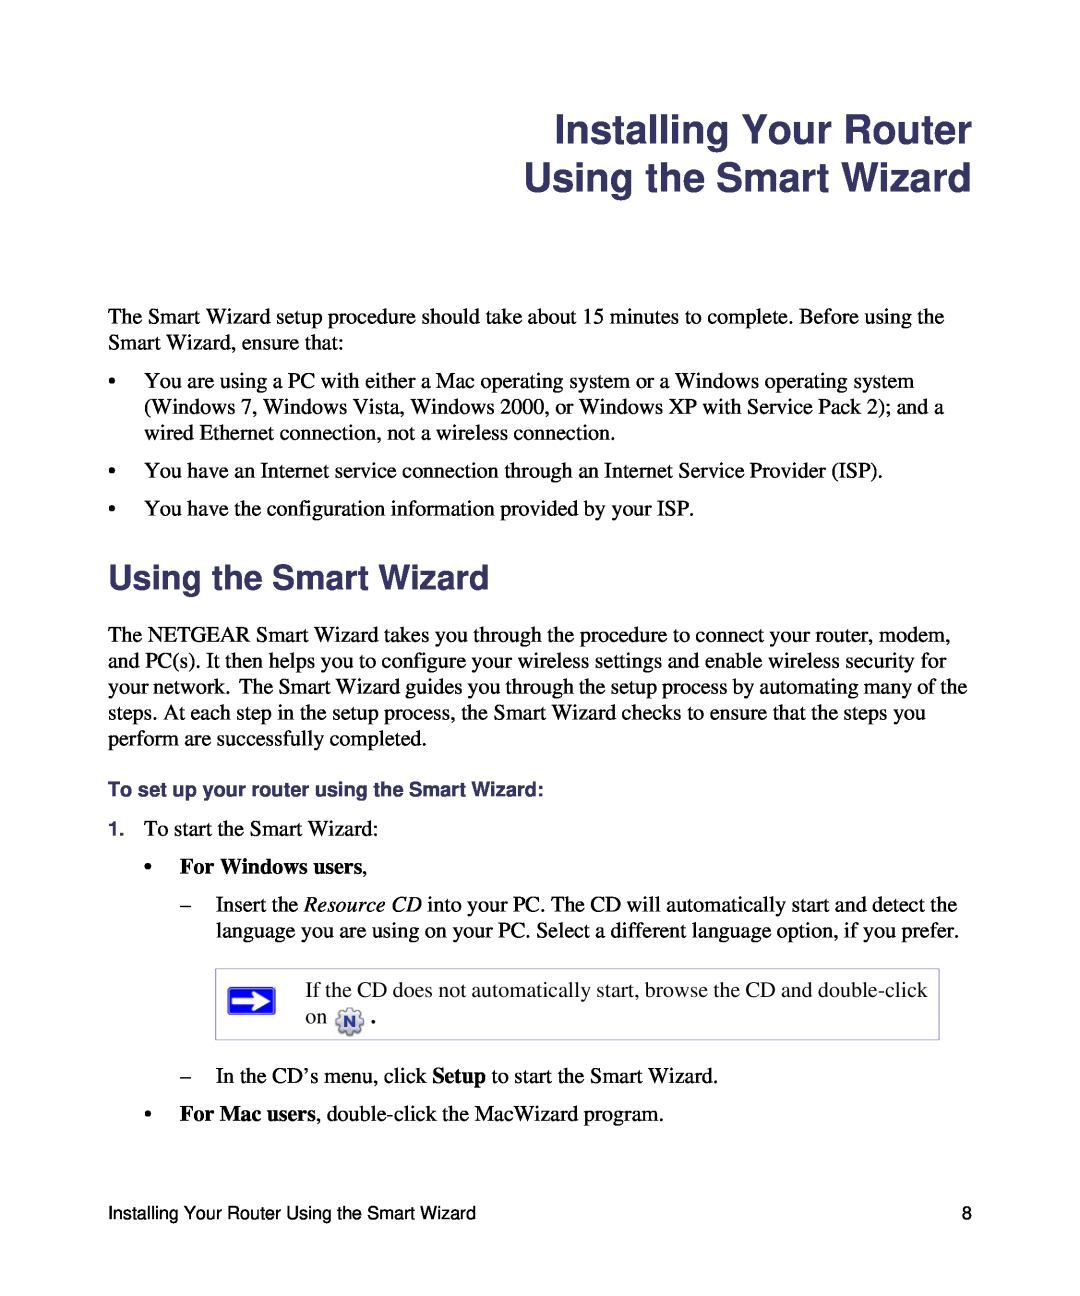 NETGEAR WNR1000, N150 manual Installing Your Router Using the Smart Wizard, For Windows users 